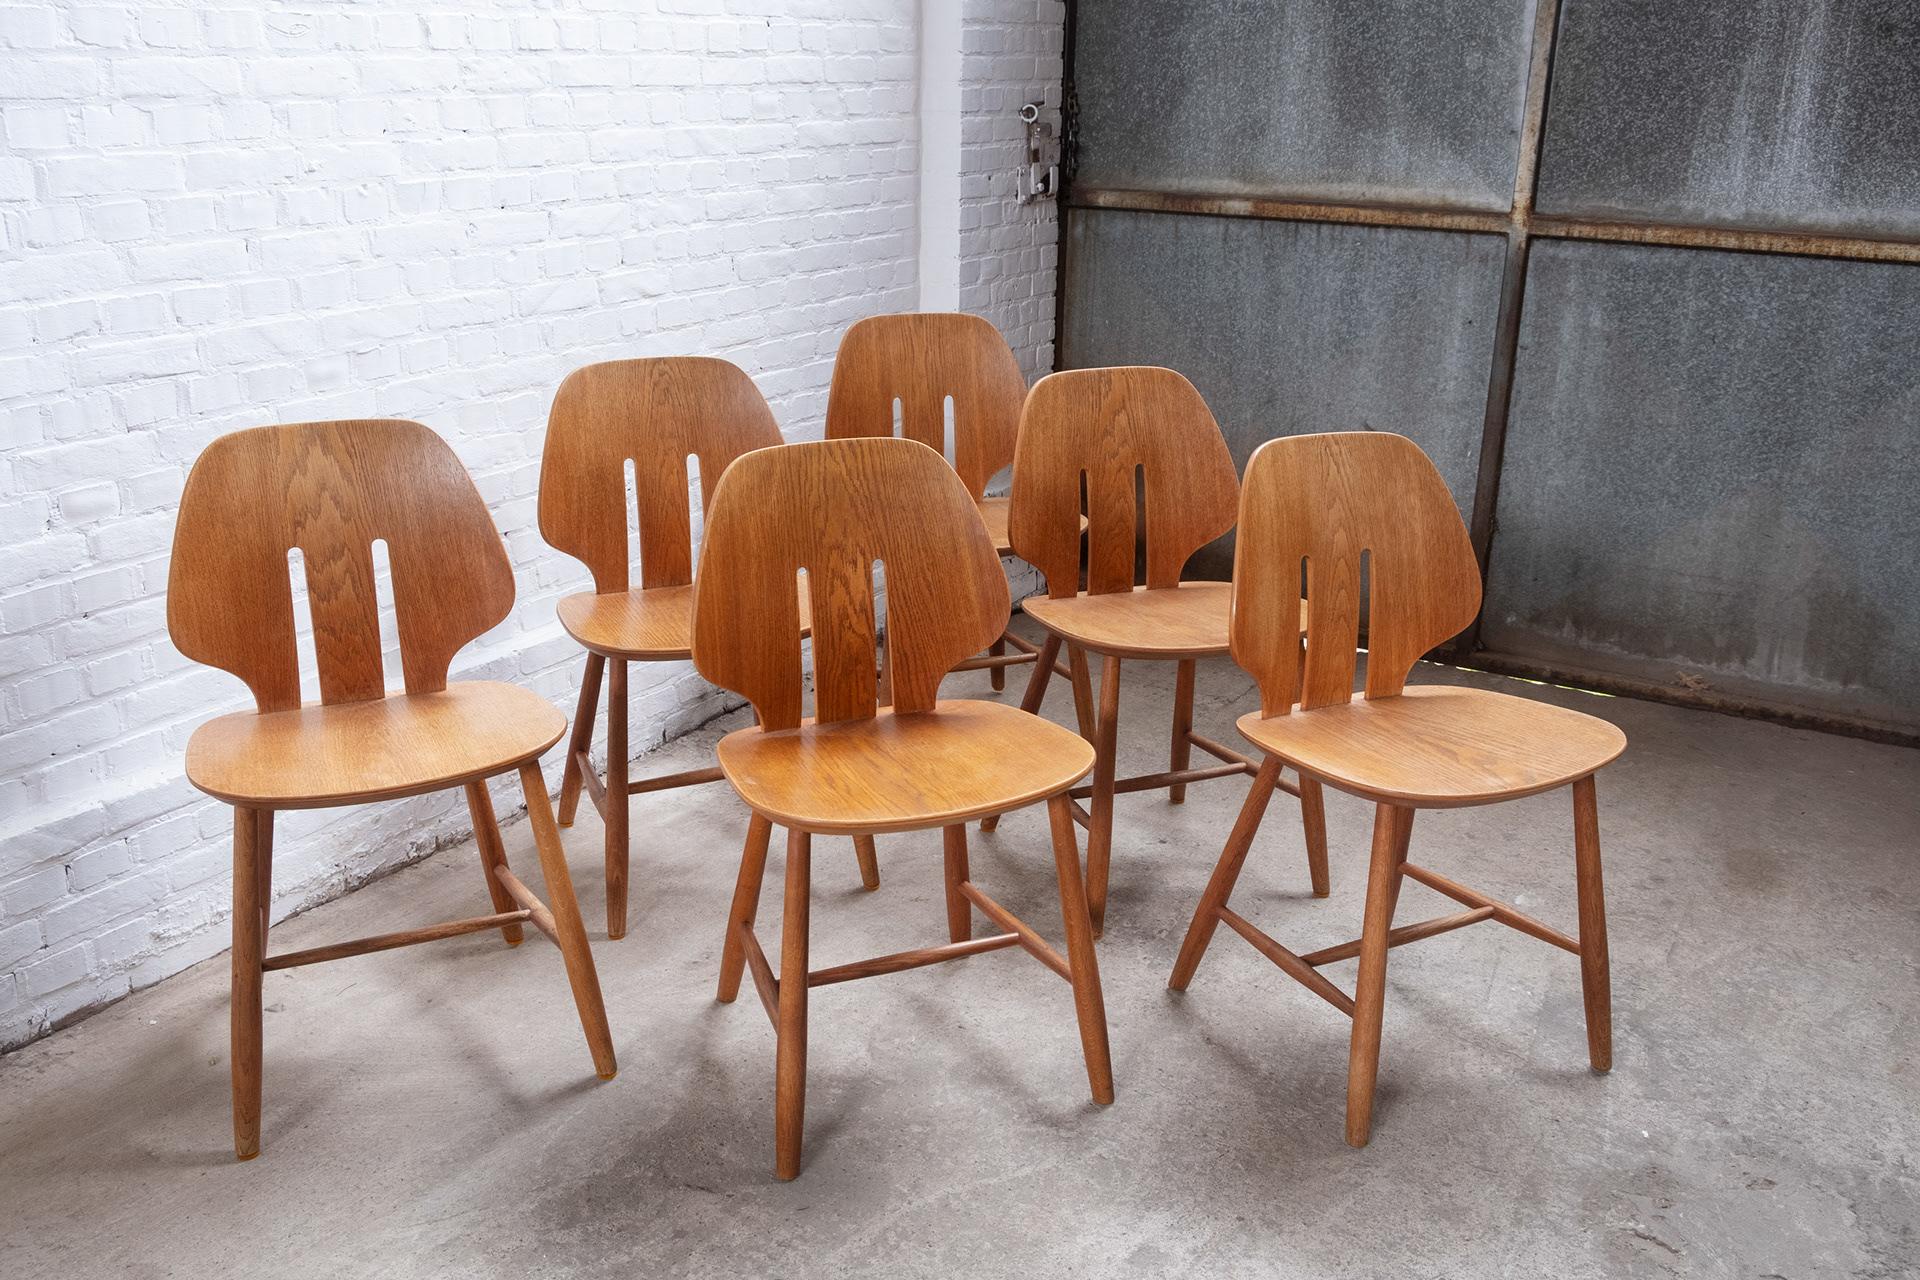 Stunning set of 6 dining chairs, model J67 by designer Ejvind A. Johansson for FDB Møbler, made in smoked oak.
The chair was designed in 1957, this set was produced in the early 1960s.
All chairs have been inspected and are sturdy and stable, in